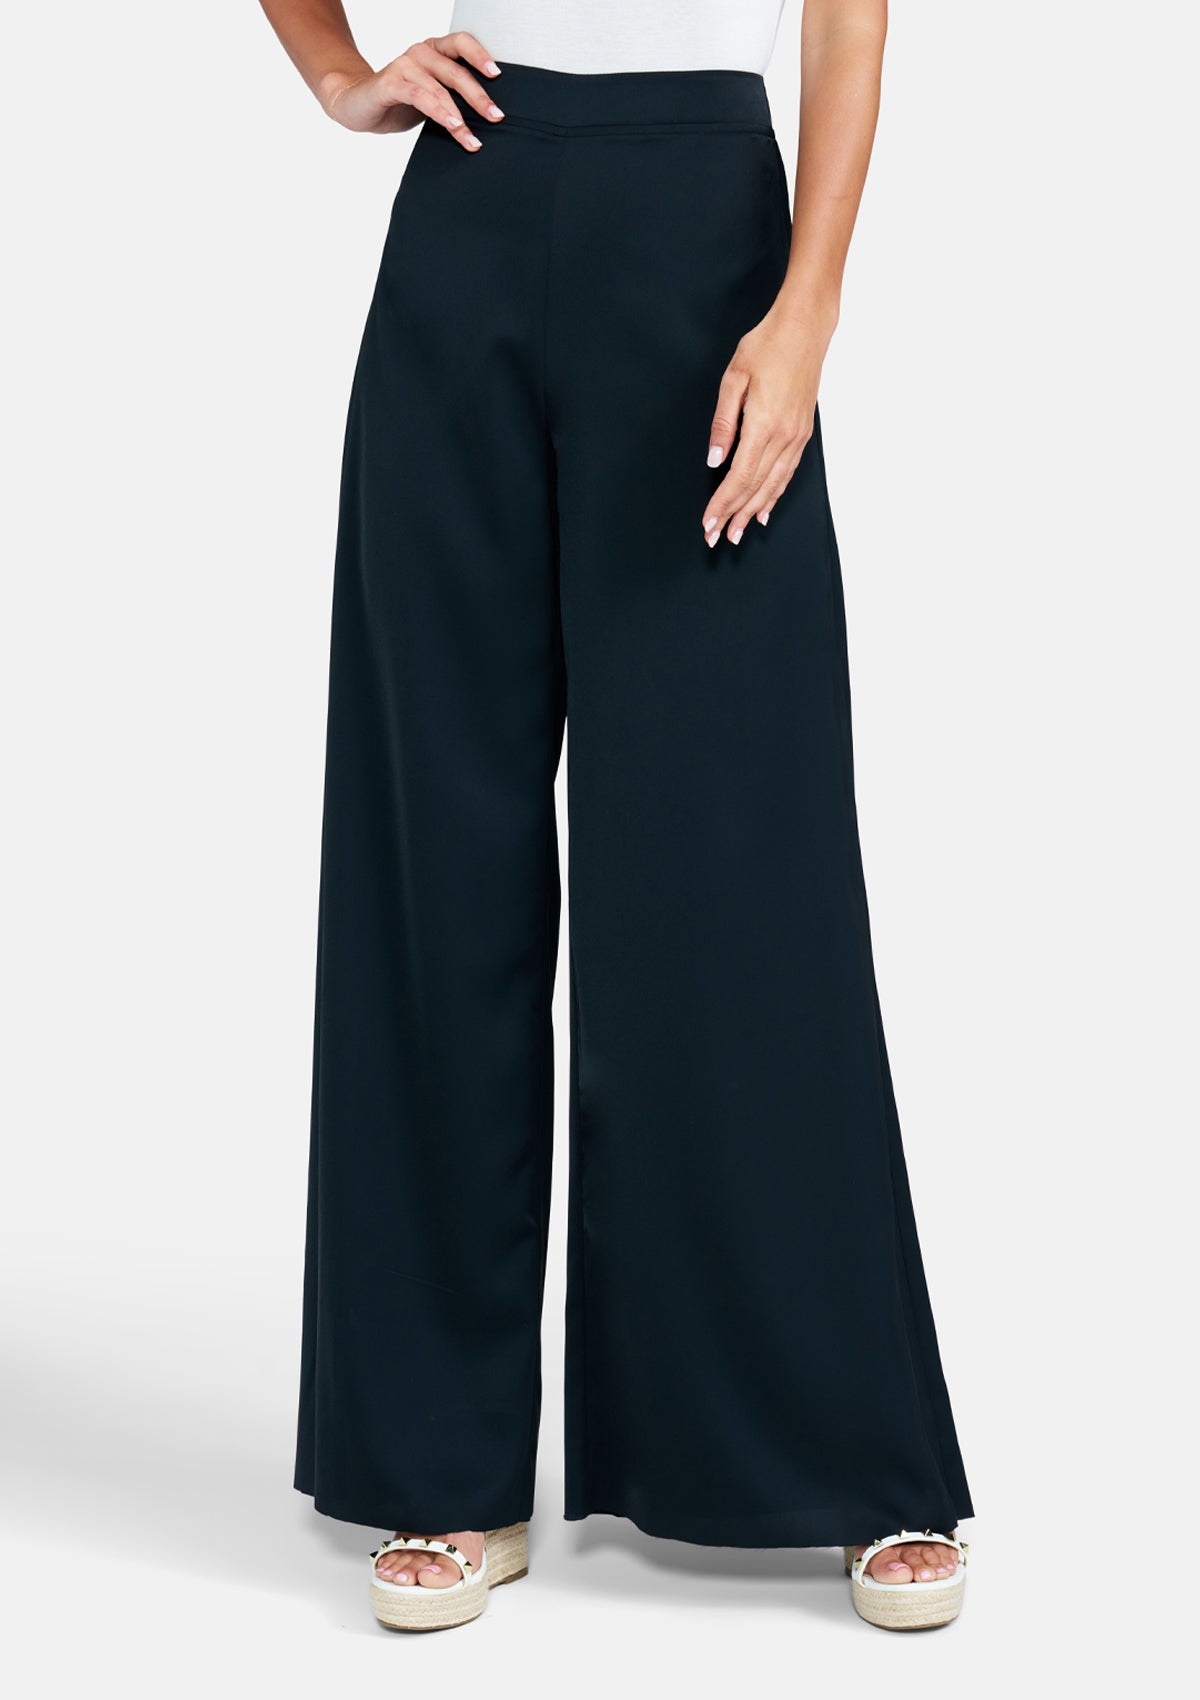 Alloy Apparel Tall Alina Wide Pants for Women in Black Size XL length 37 | Polyester